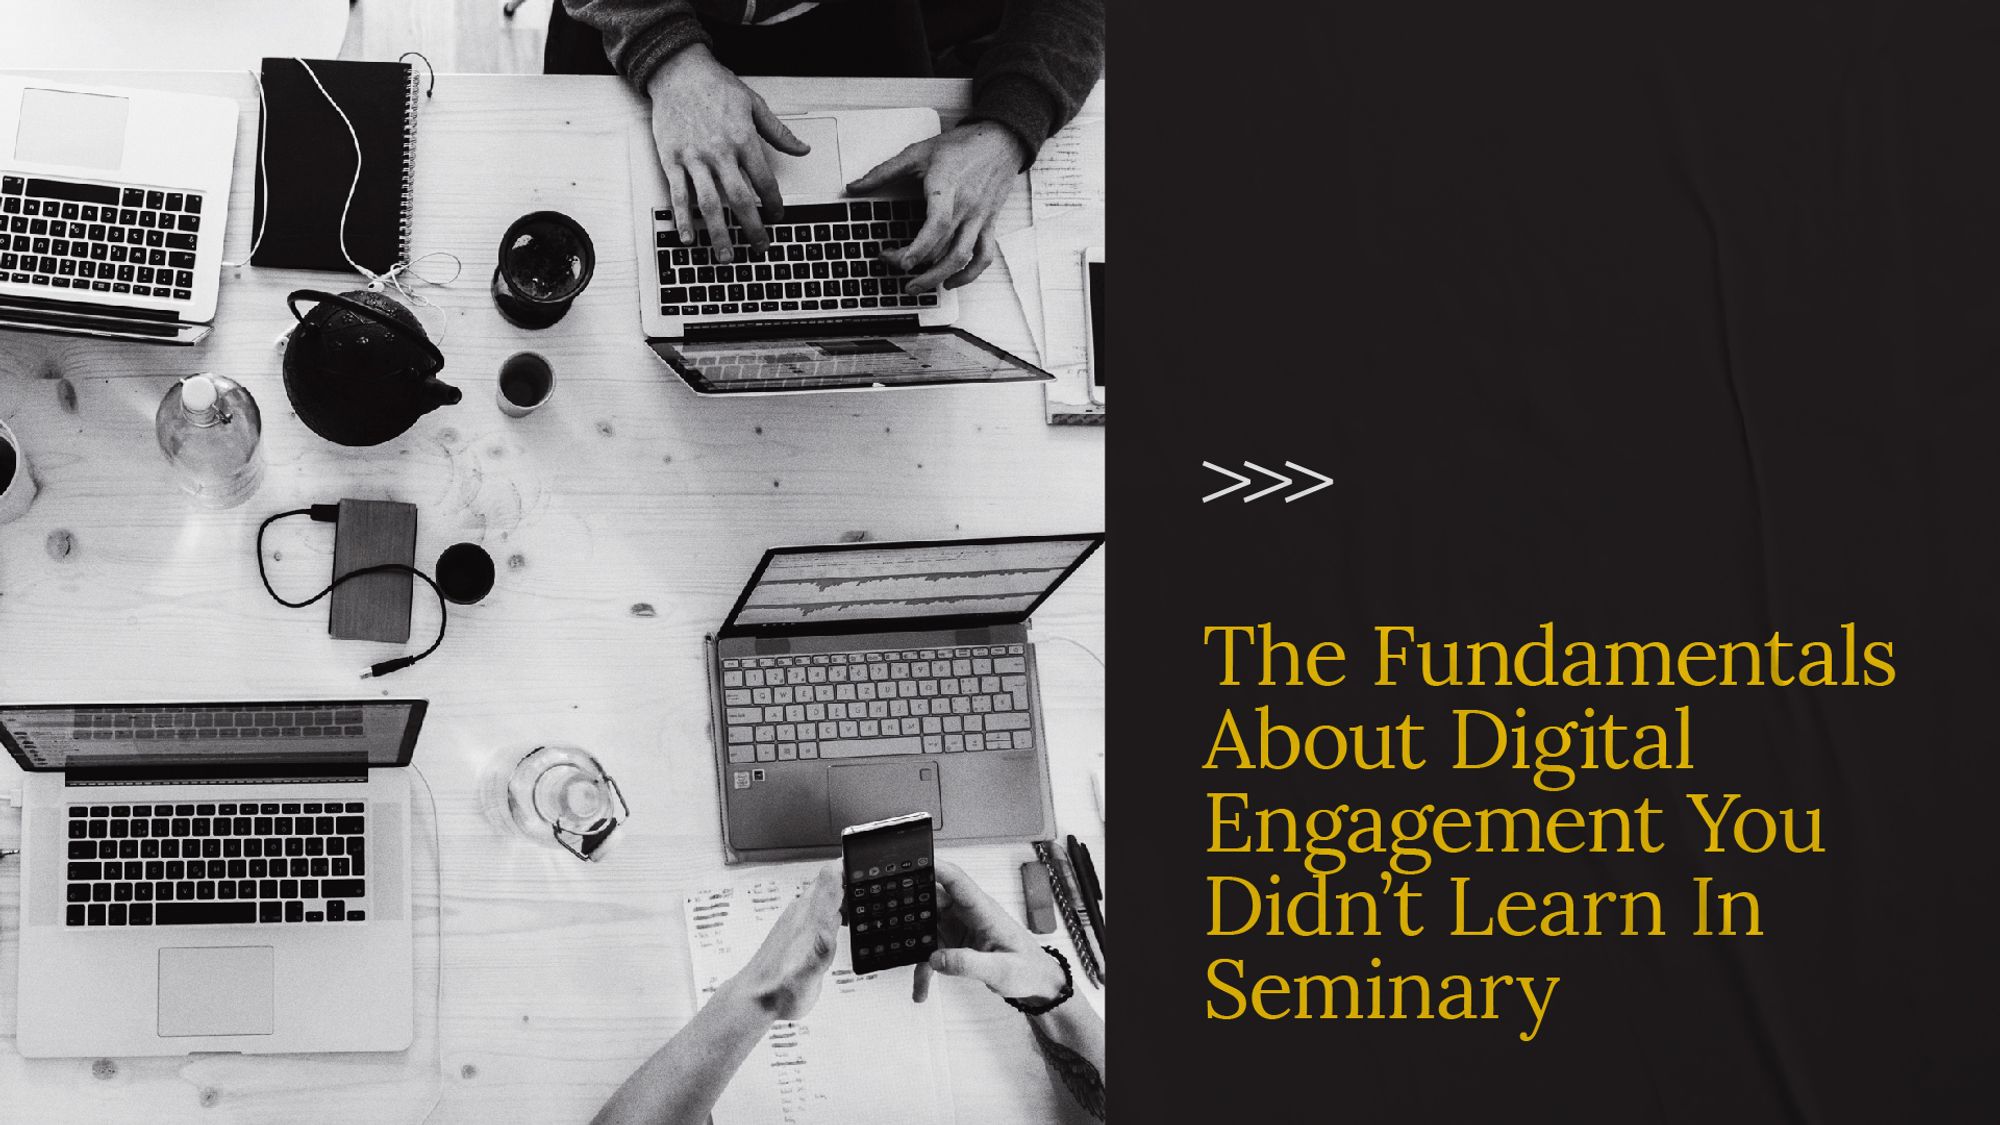 The Fundamentals About Digital Engagement You Didn’t Learn In Seminary